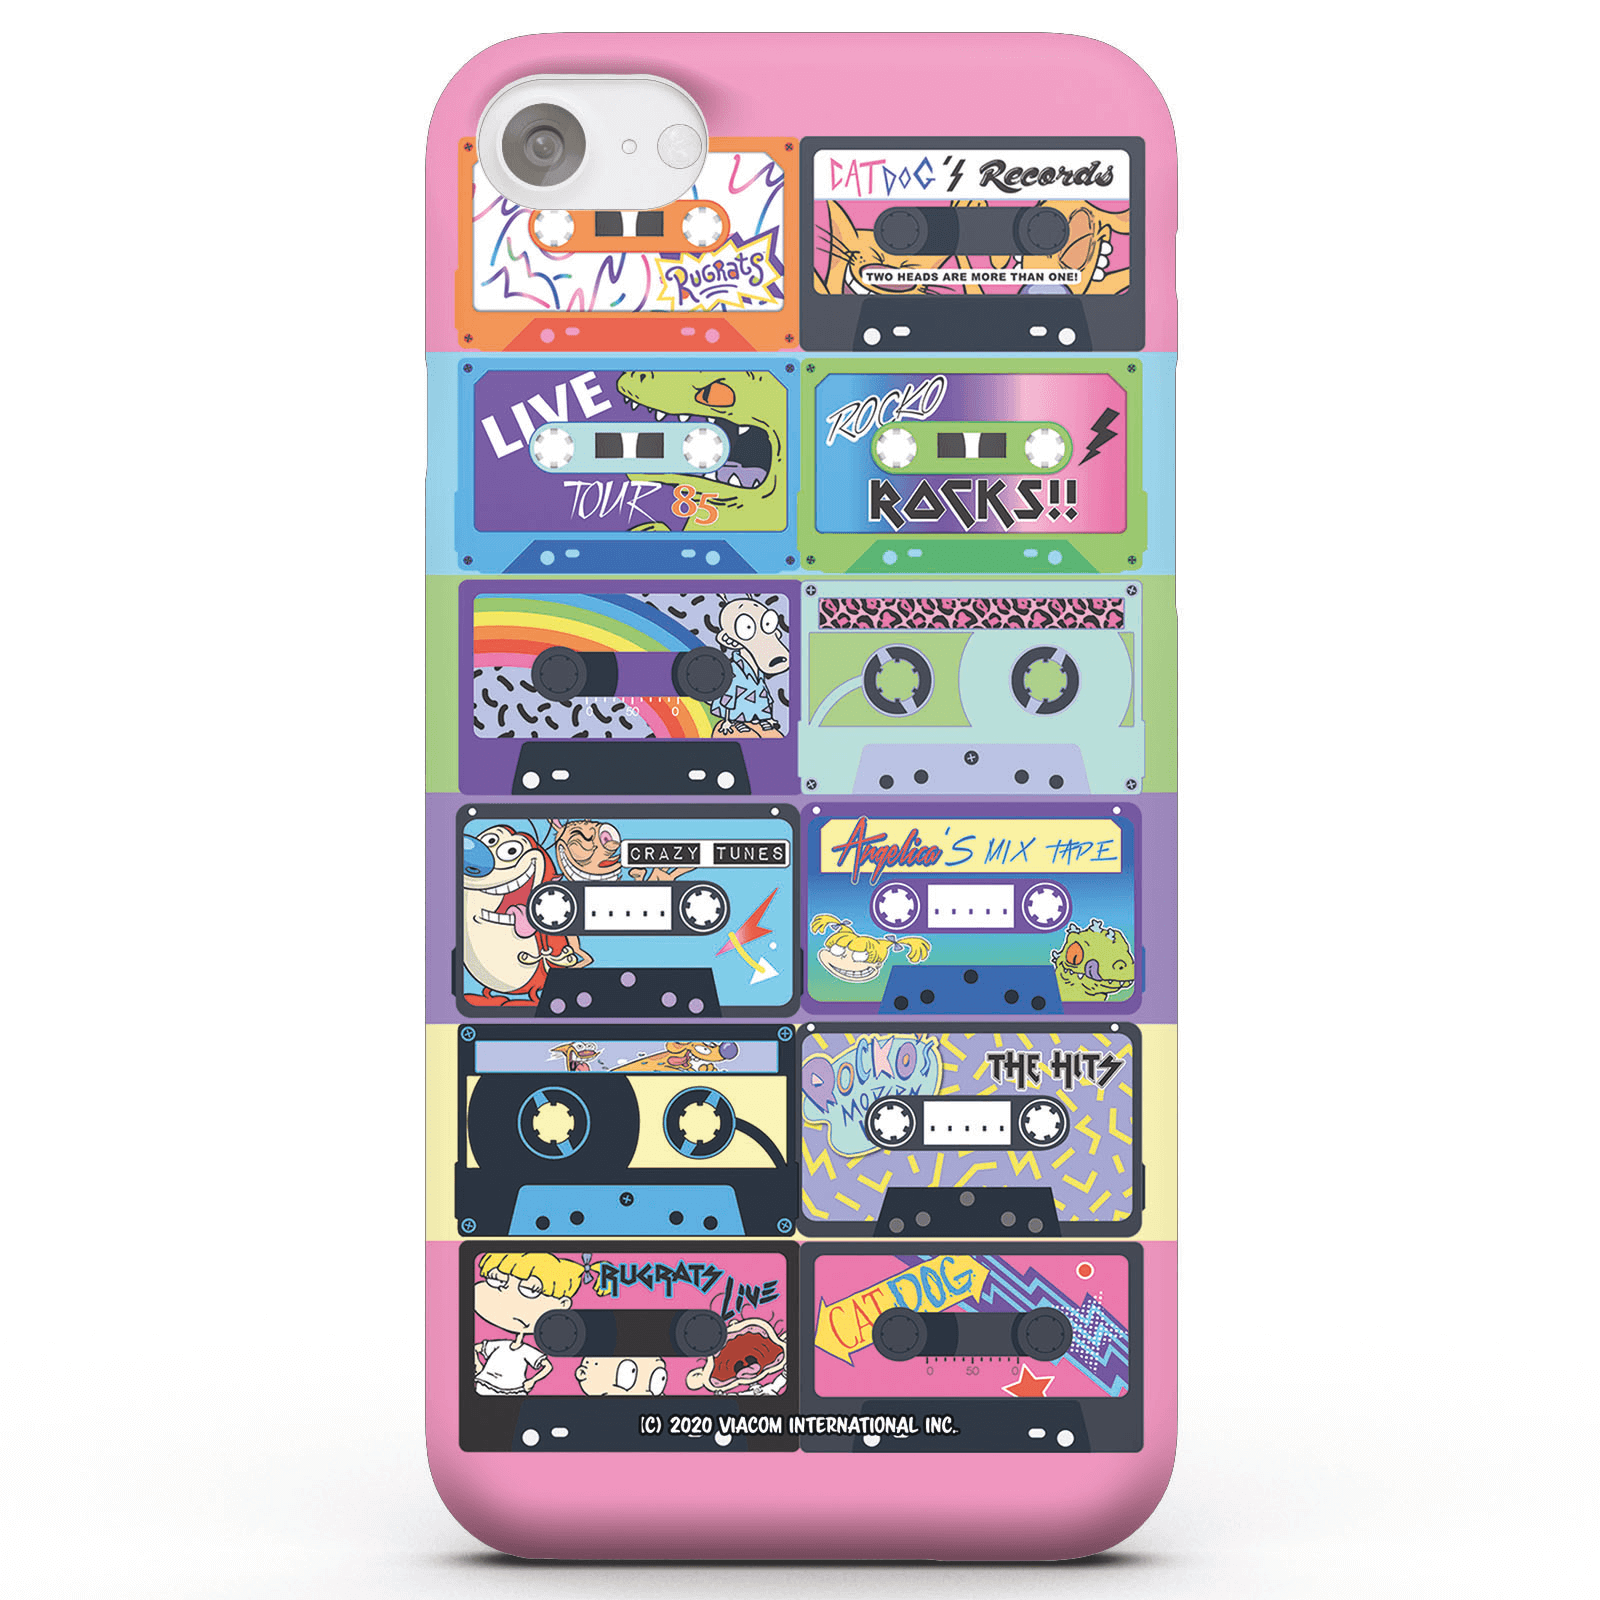 Coque Smartphone Nickelodeon Casettes pour iPhone et Android - iPhone 5/5s - Coque Simple Matte